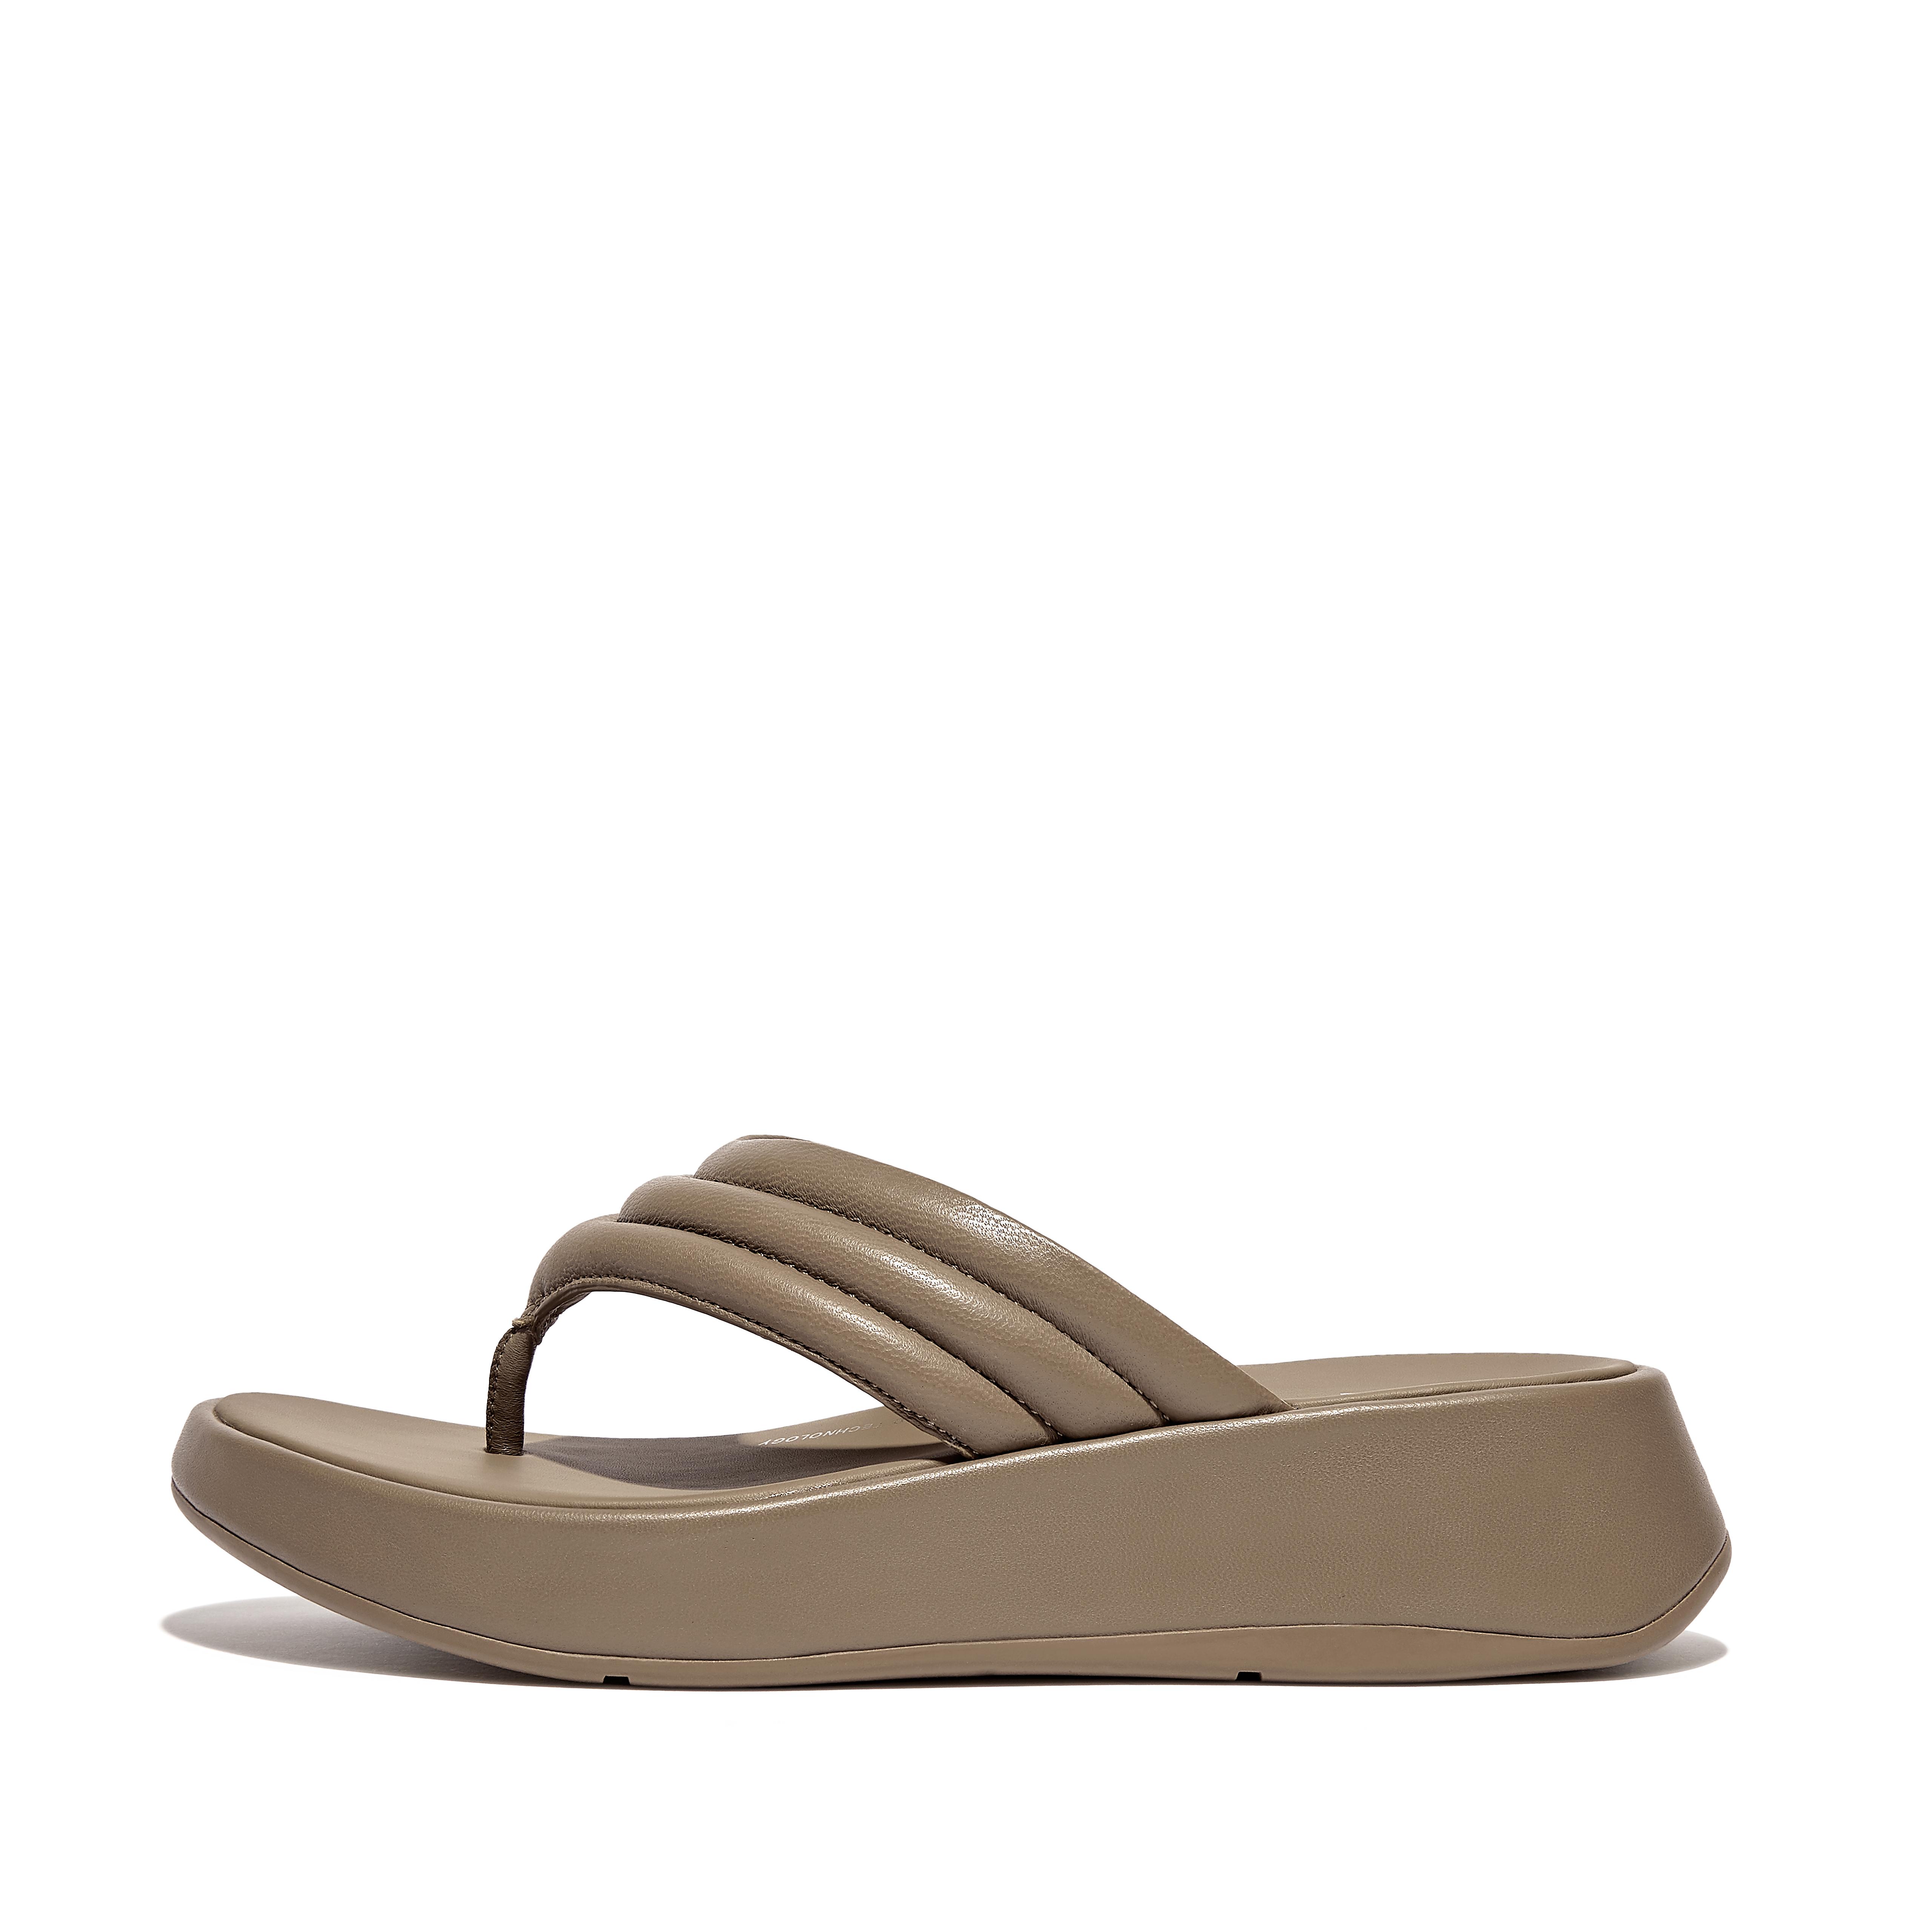 Fitflop Padded Leather Flatform Toe-Post Sandals,minky grey